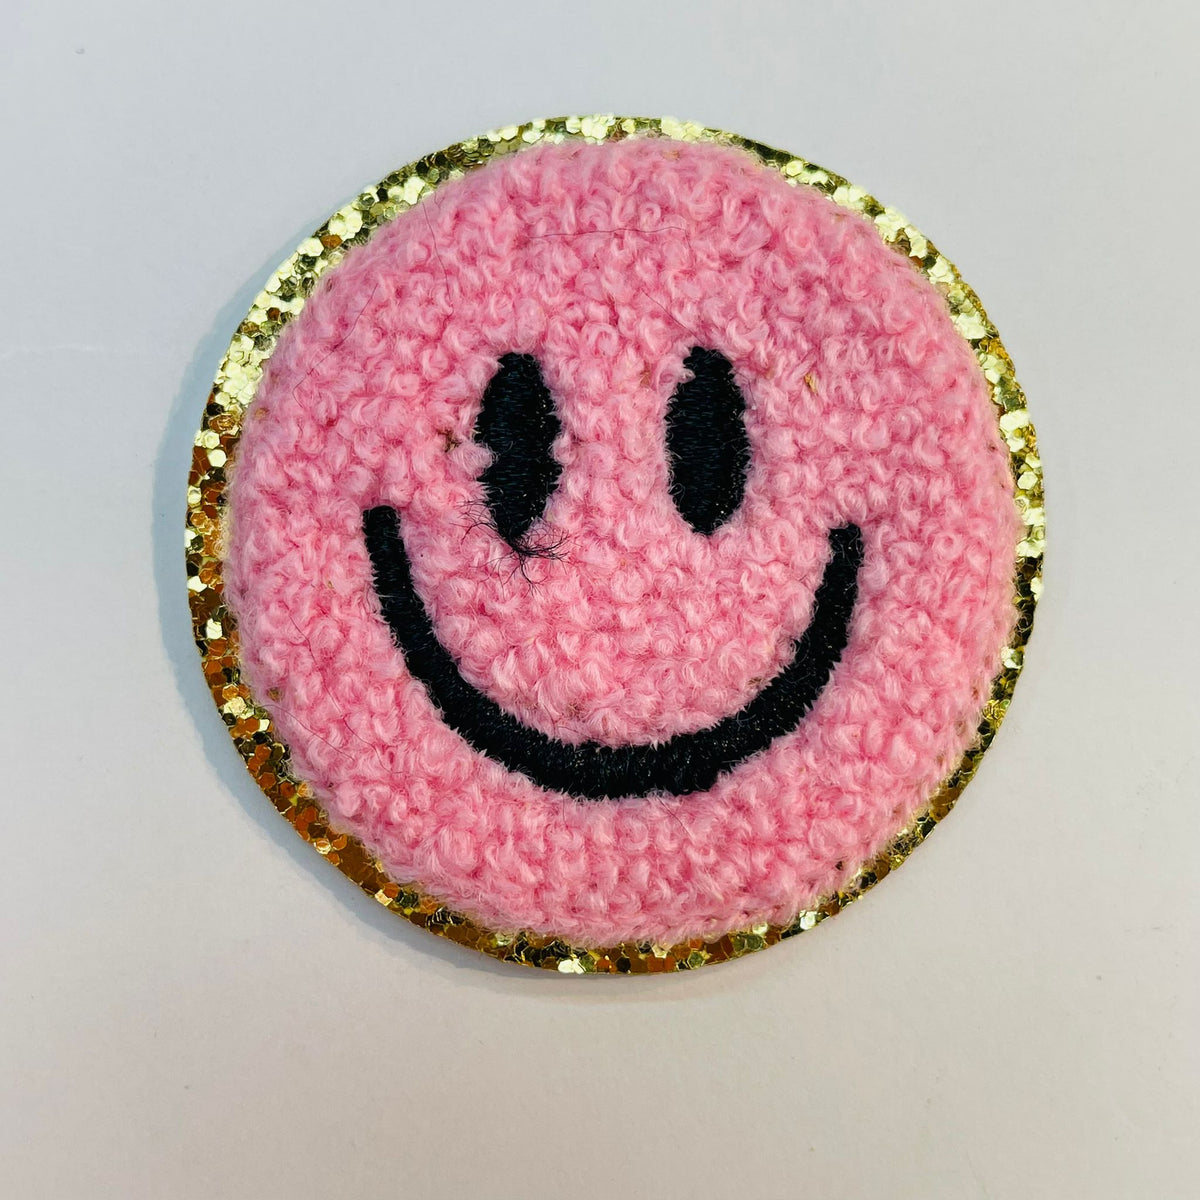 Smiley Face Self-Adhesive Patch Sticker